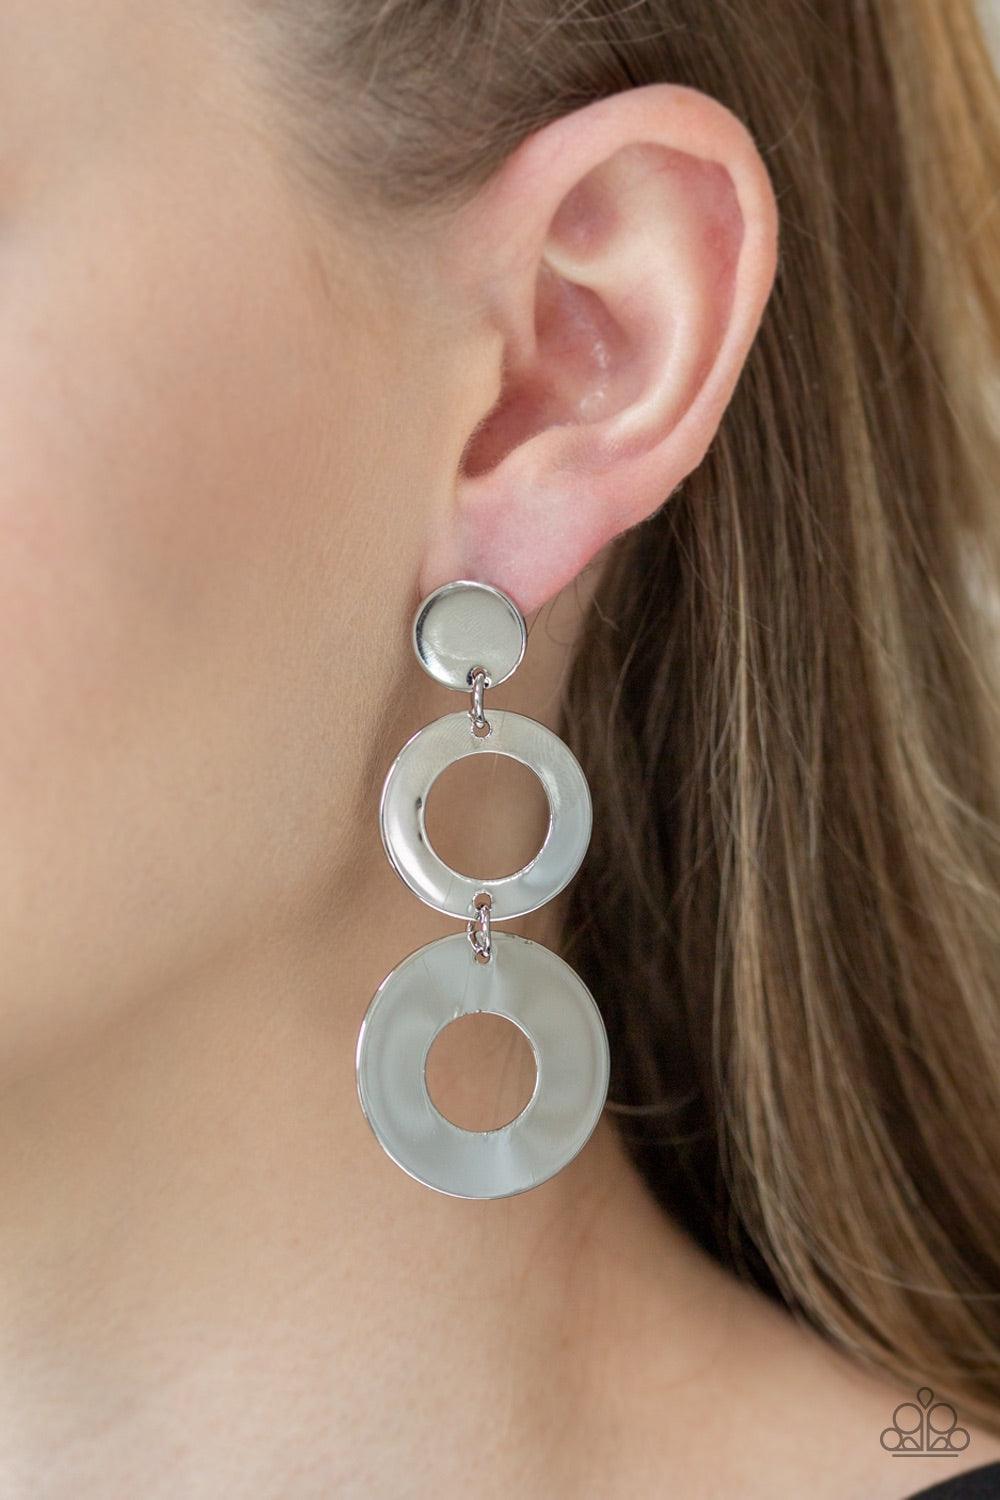 Paparazzi Accessories Pop Idol - Silver Attached to a silver fitting, glistening silver hoops link together, creating a shimmery lure. Earring attaches to a standard post fitting. Jewelry